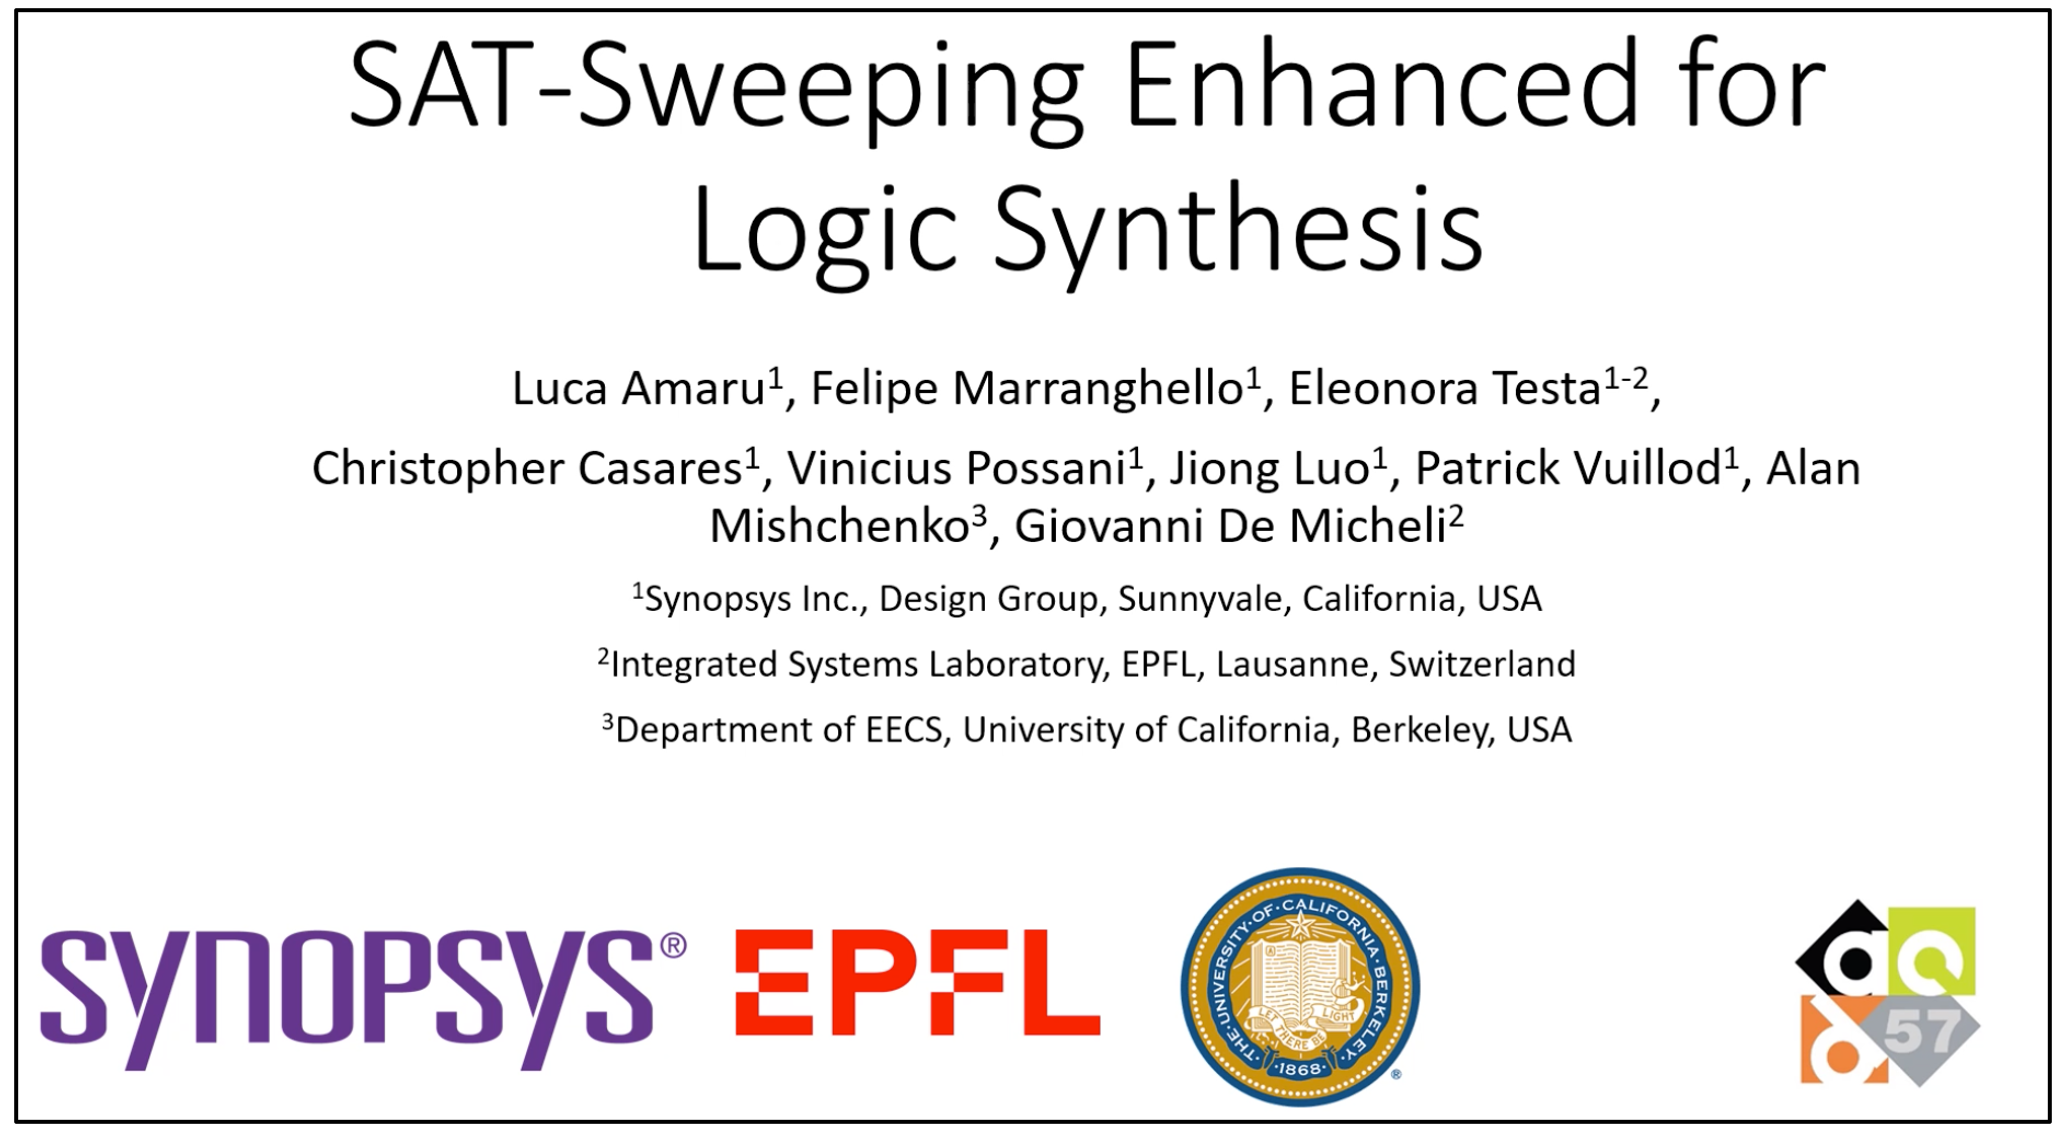 Synopsys Presents SAT-Sweeping Enhancements for Logic Synthesis